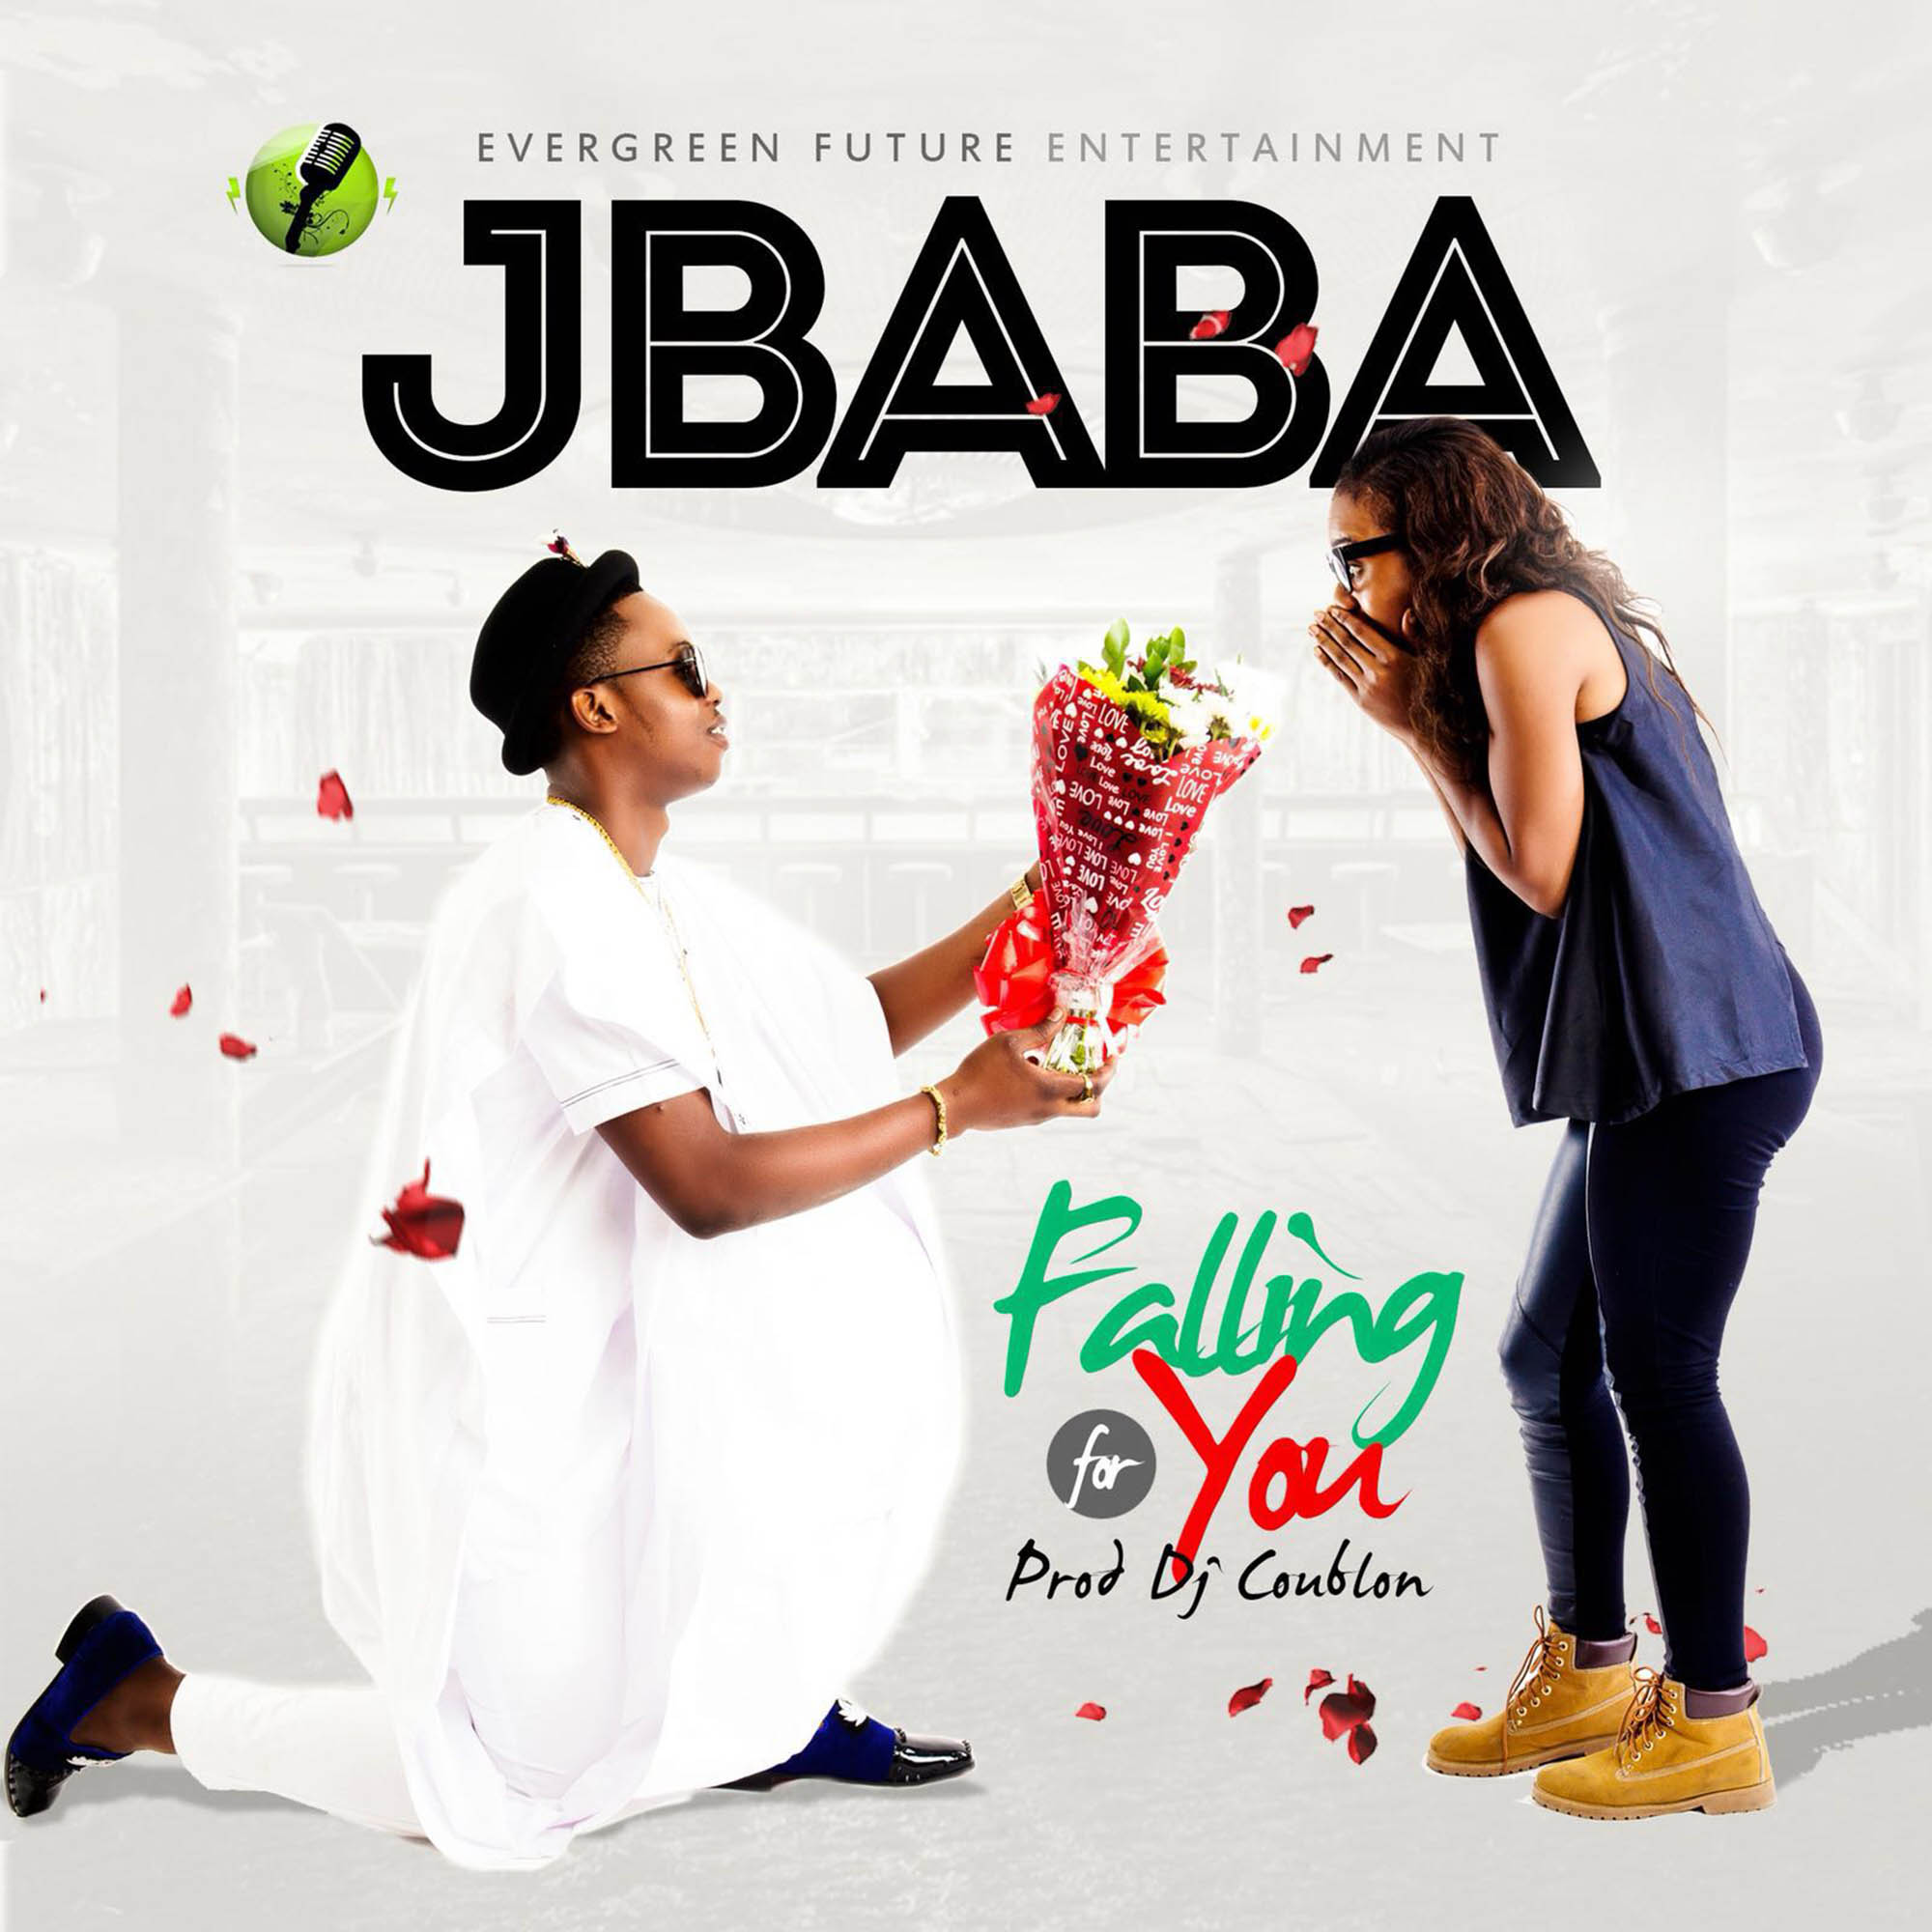 J-Baba - Falling For You (Prod. by DJ Coublon)